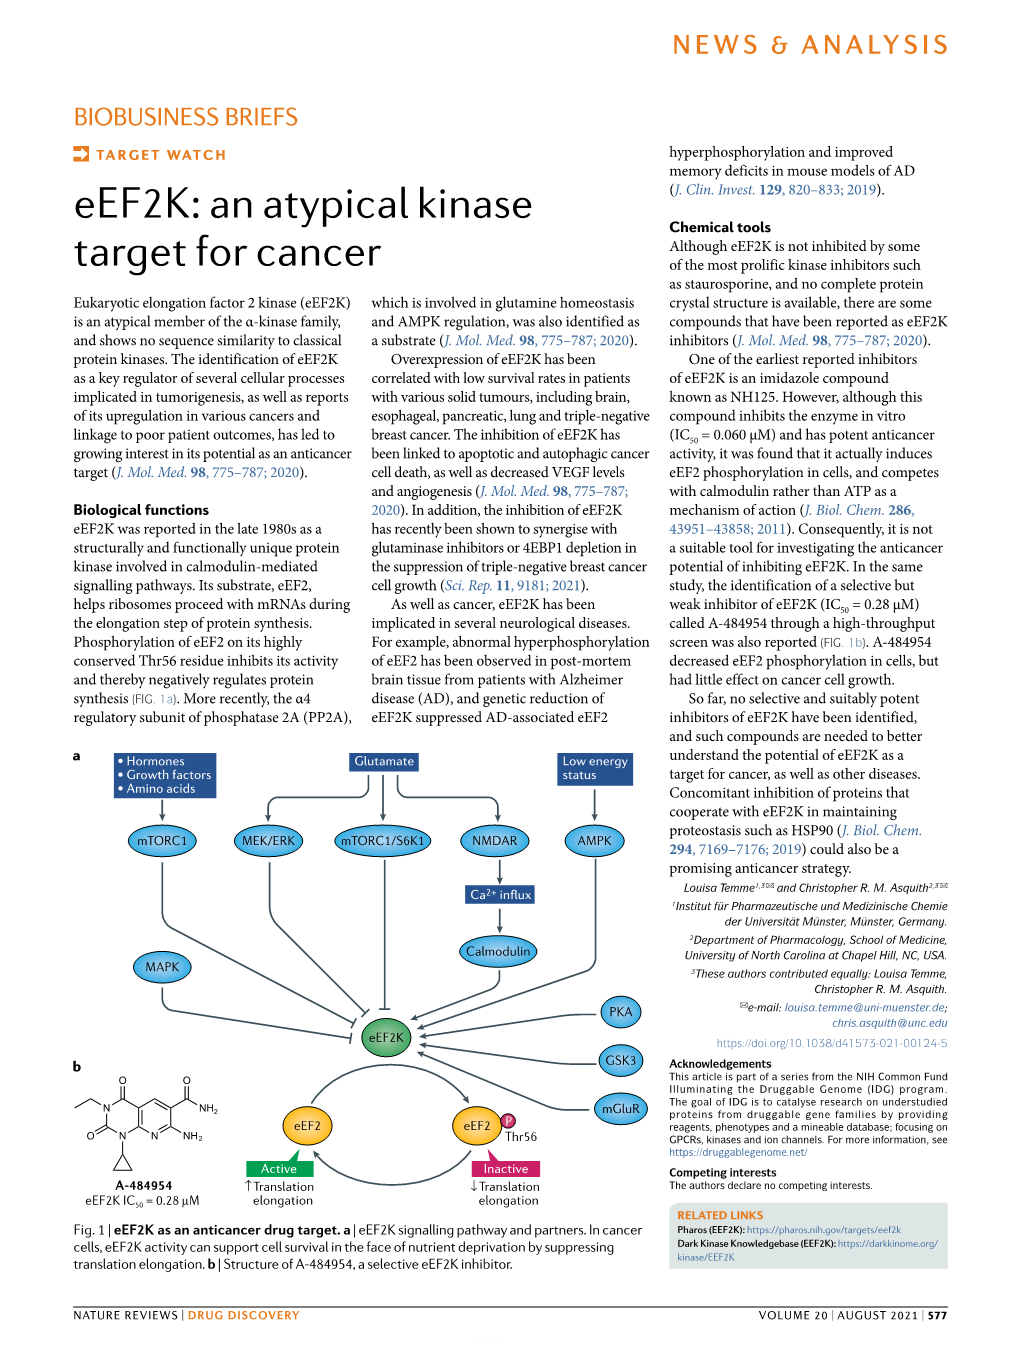 Eef2k: an Atypical Kinase Target for Cancer